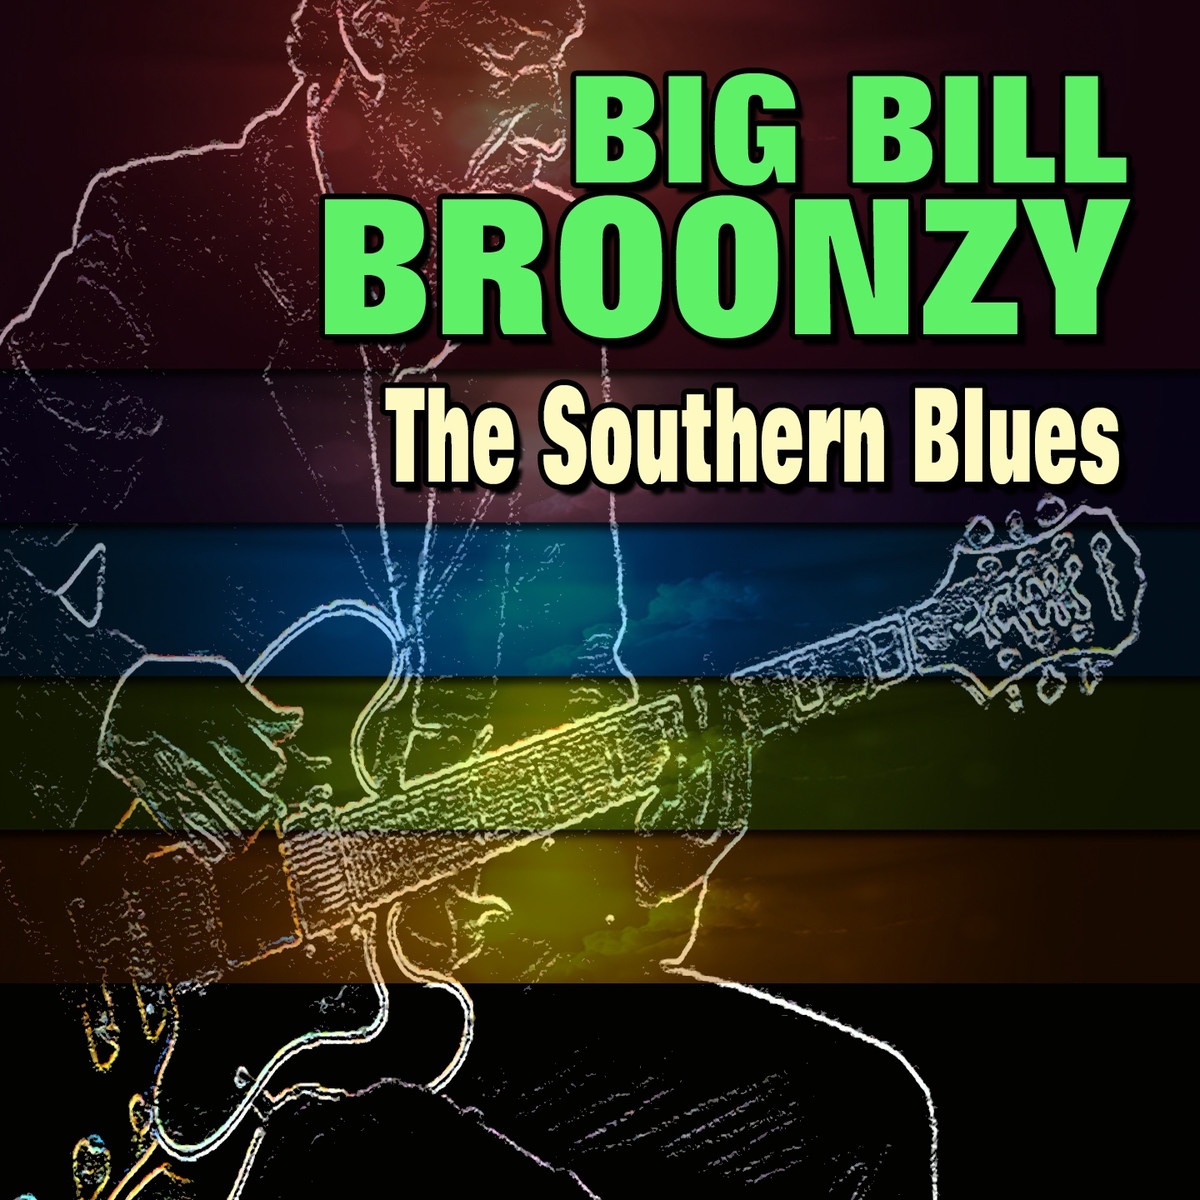 The Southern Blues